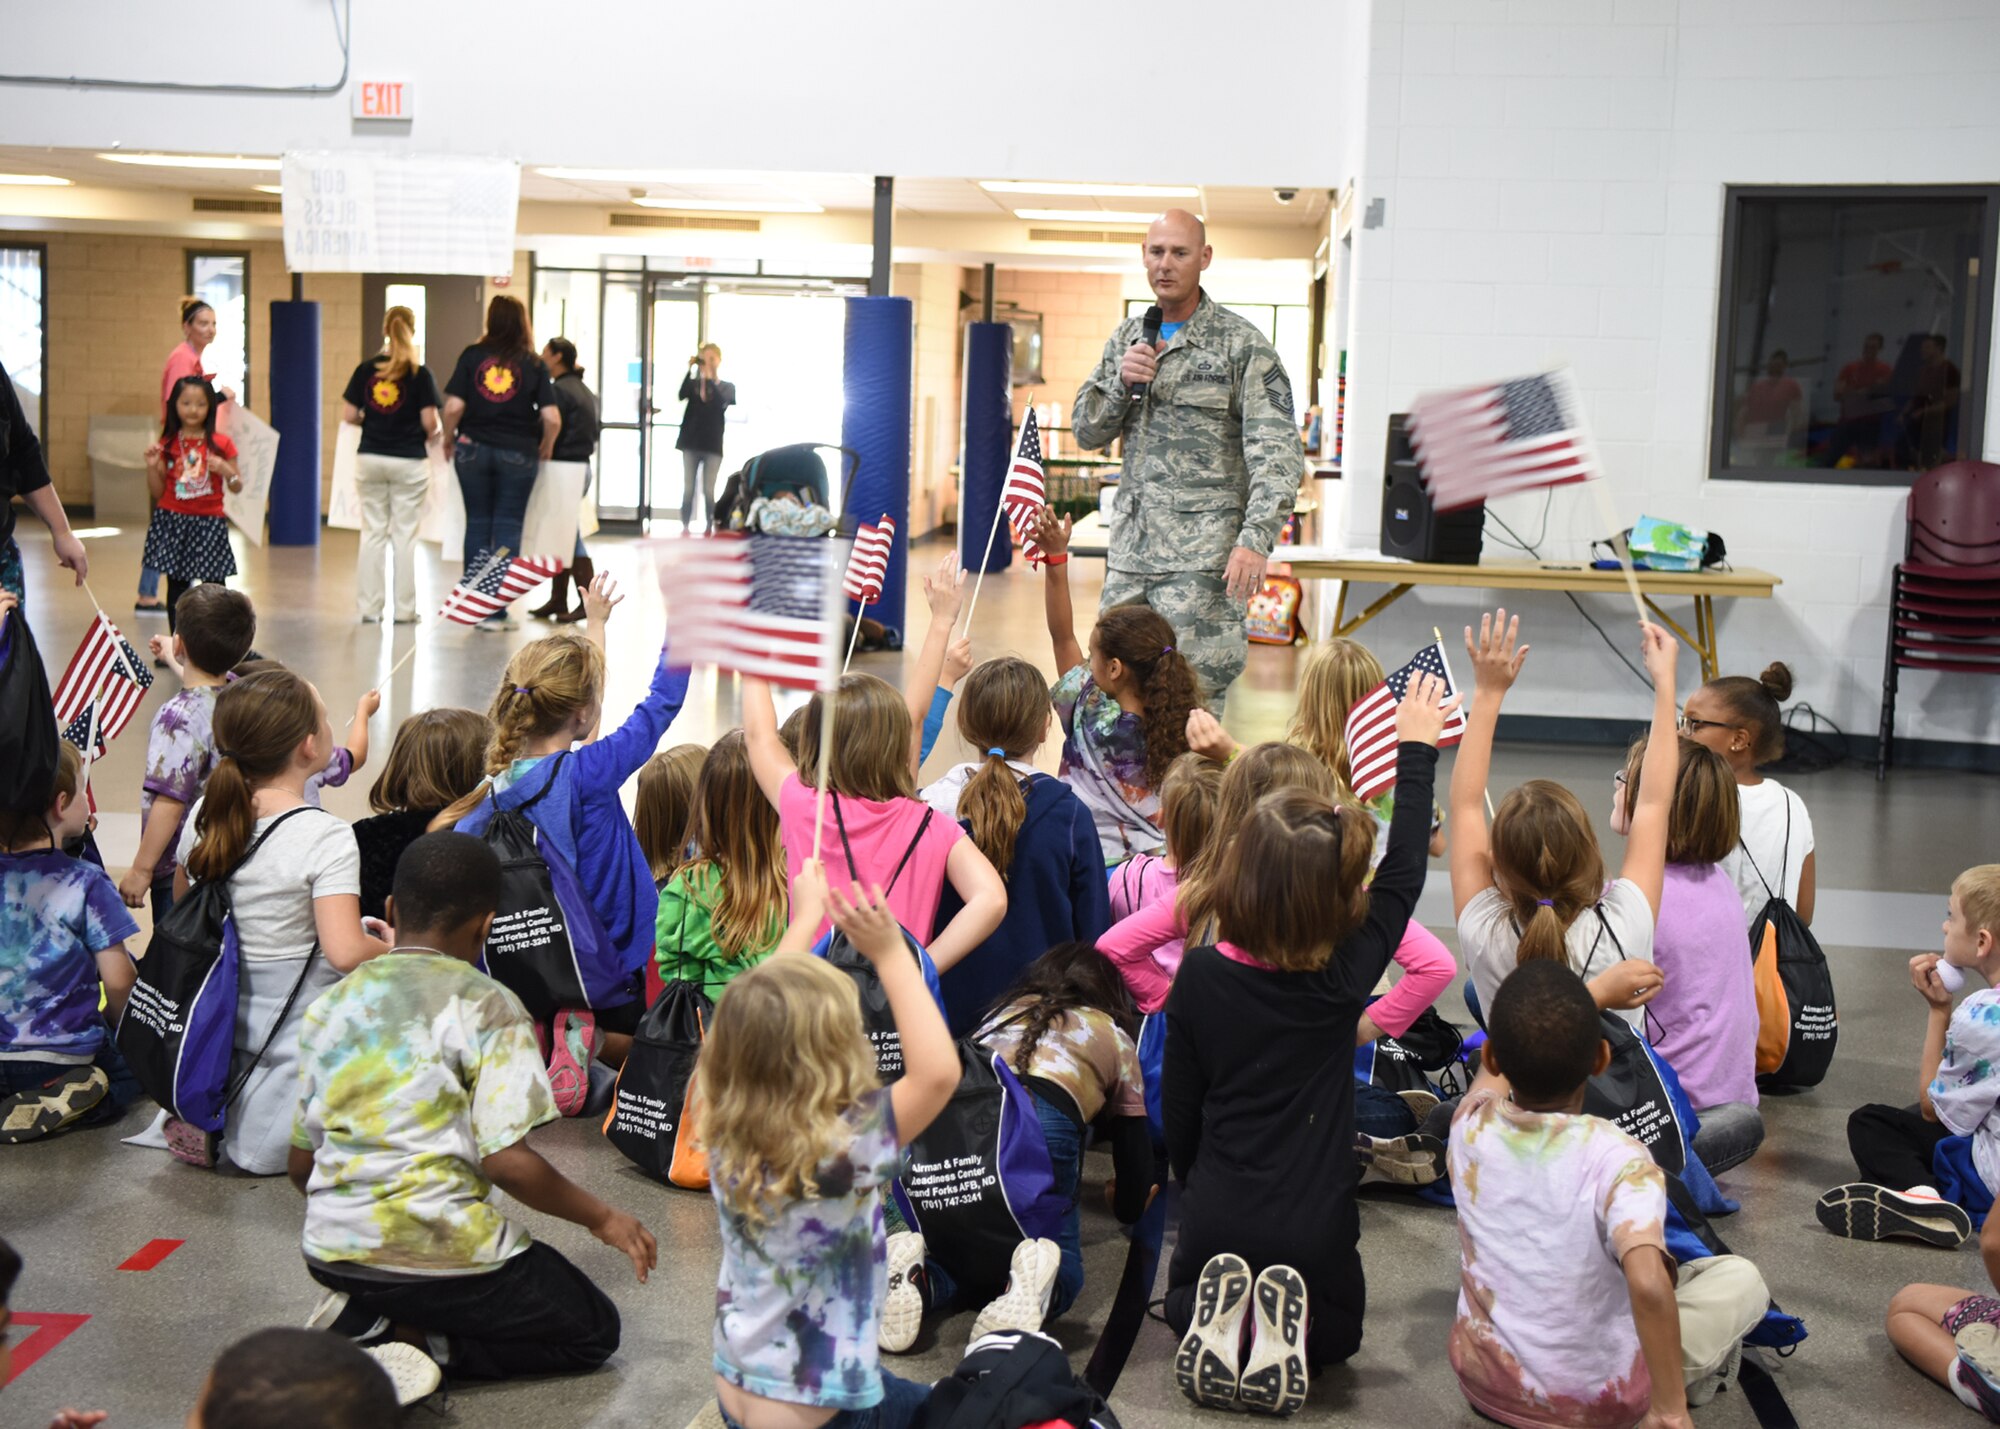 Chief Master Sgt. Terrence Stanich, 319th Mission Support Group superintendent, gives a speech at the end of the kid’s deployment day Sept. 29, 2017 at Grand Forks Air Force Base, North Dakota. The event was held to give children of military members the chance to experience what a deployment is like. (U.S. Air Force photo/Senior Airman Cierra Presentado)